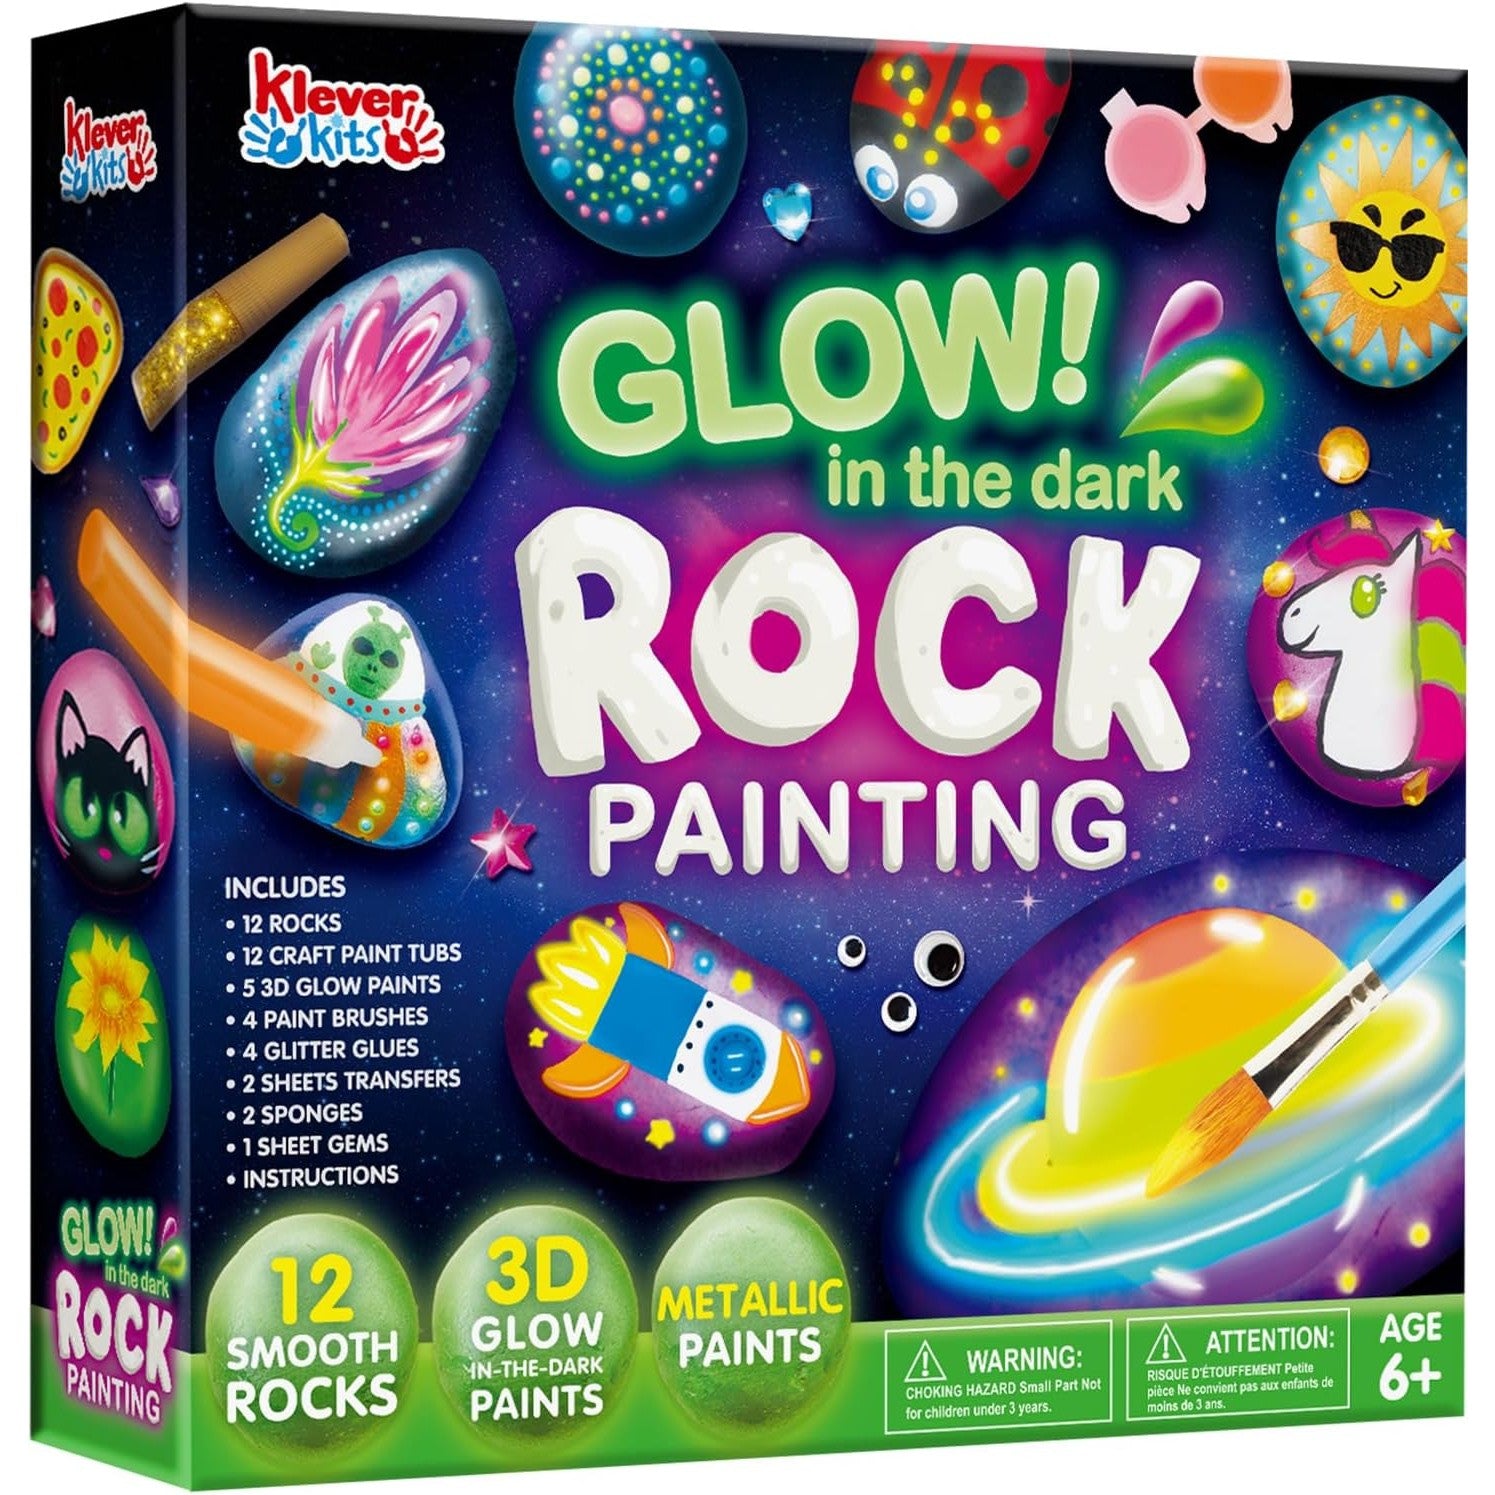 Keep kids busy without screens with this glow-in-the-dark rock paintin –